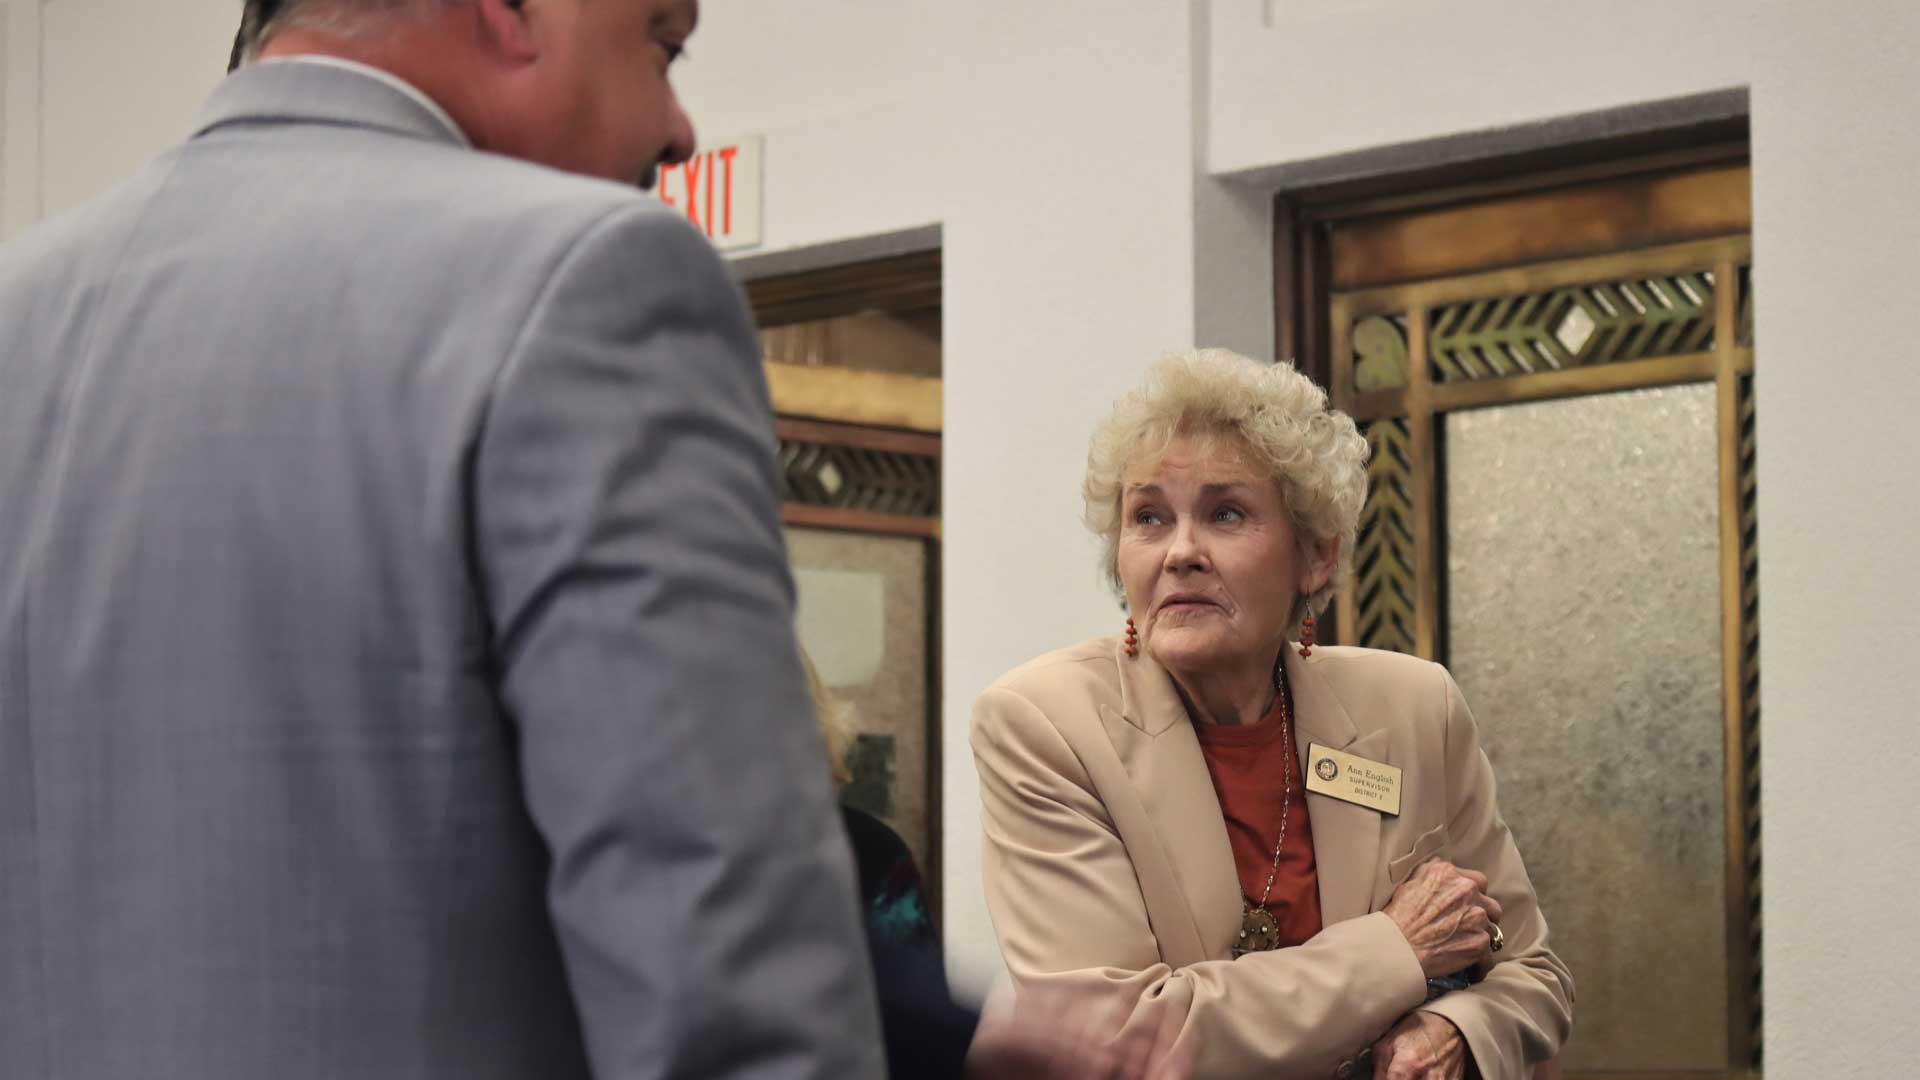 Cochise County District Two Supervisor Ann English (right) talks with the board’s attorney Timothy La Sota (left) after May 29 hearing concluded at the Cochise County Superior Court in Bisbee, AZ.
